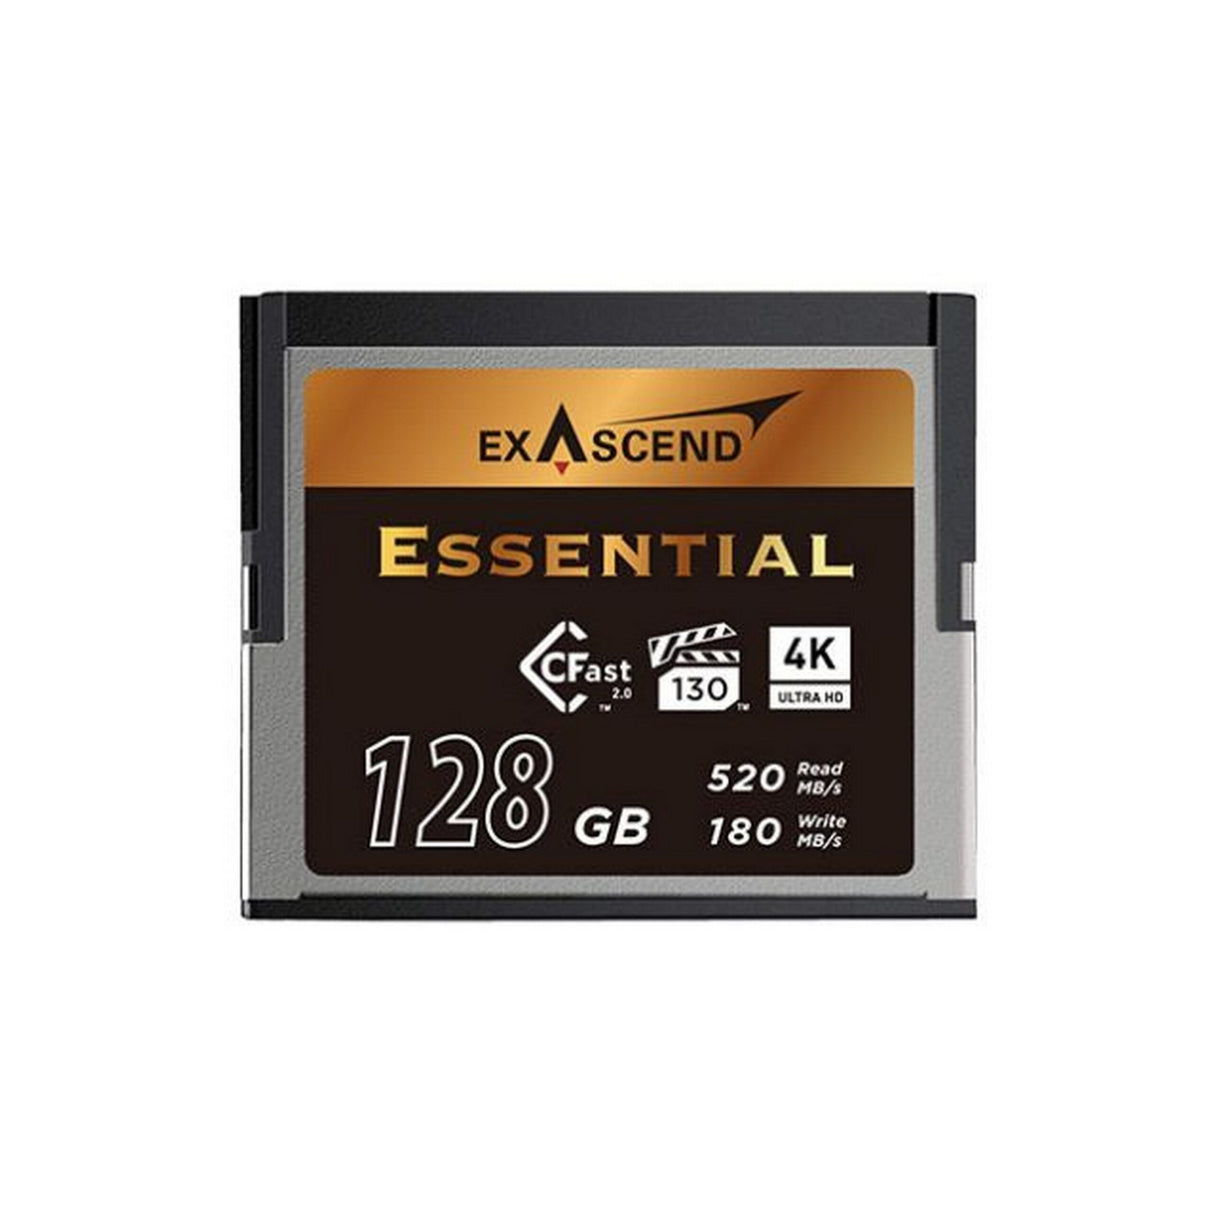 Exascend 128GB Essential Cfast 2.0 Memory Card